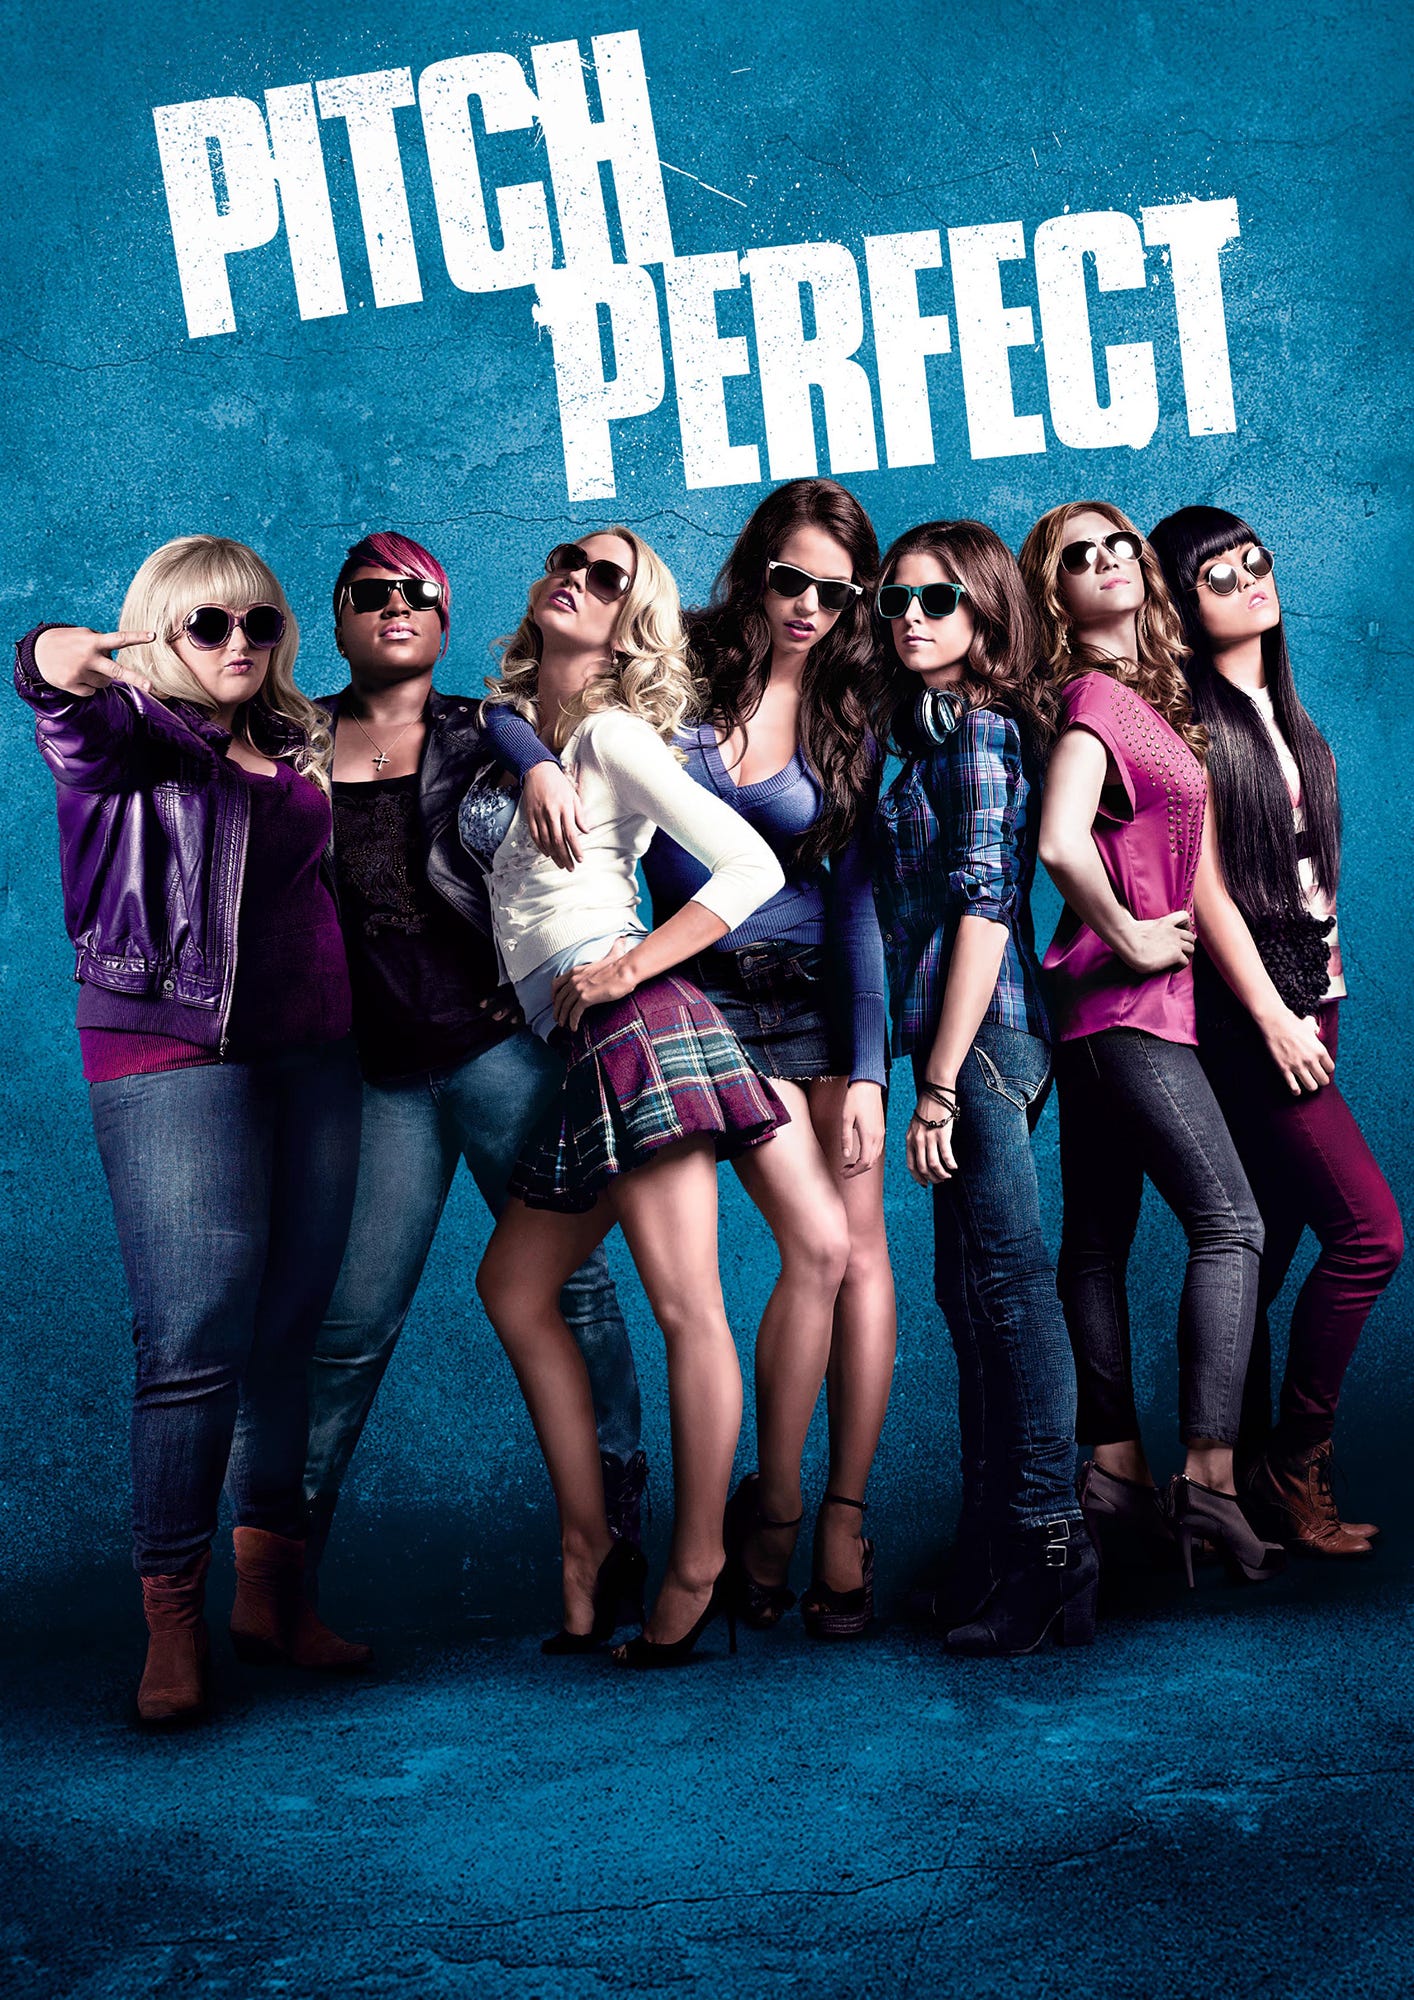 Pitch Perfect' Cast: Where Are They Now?